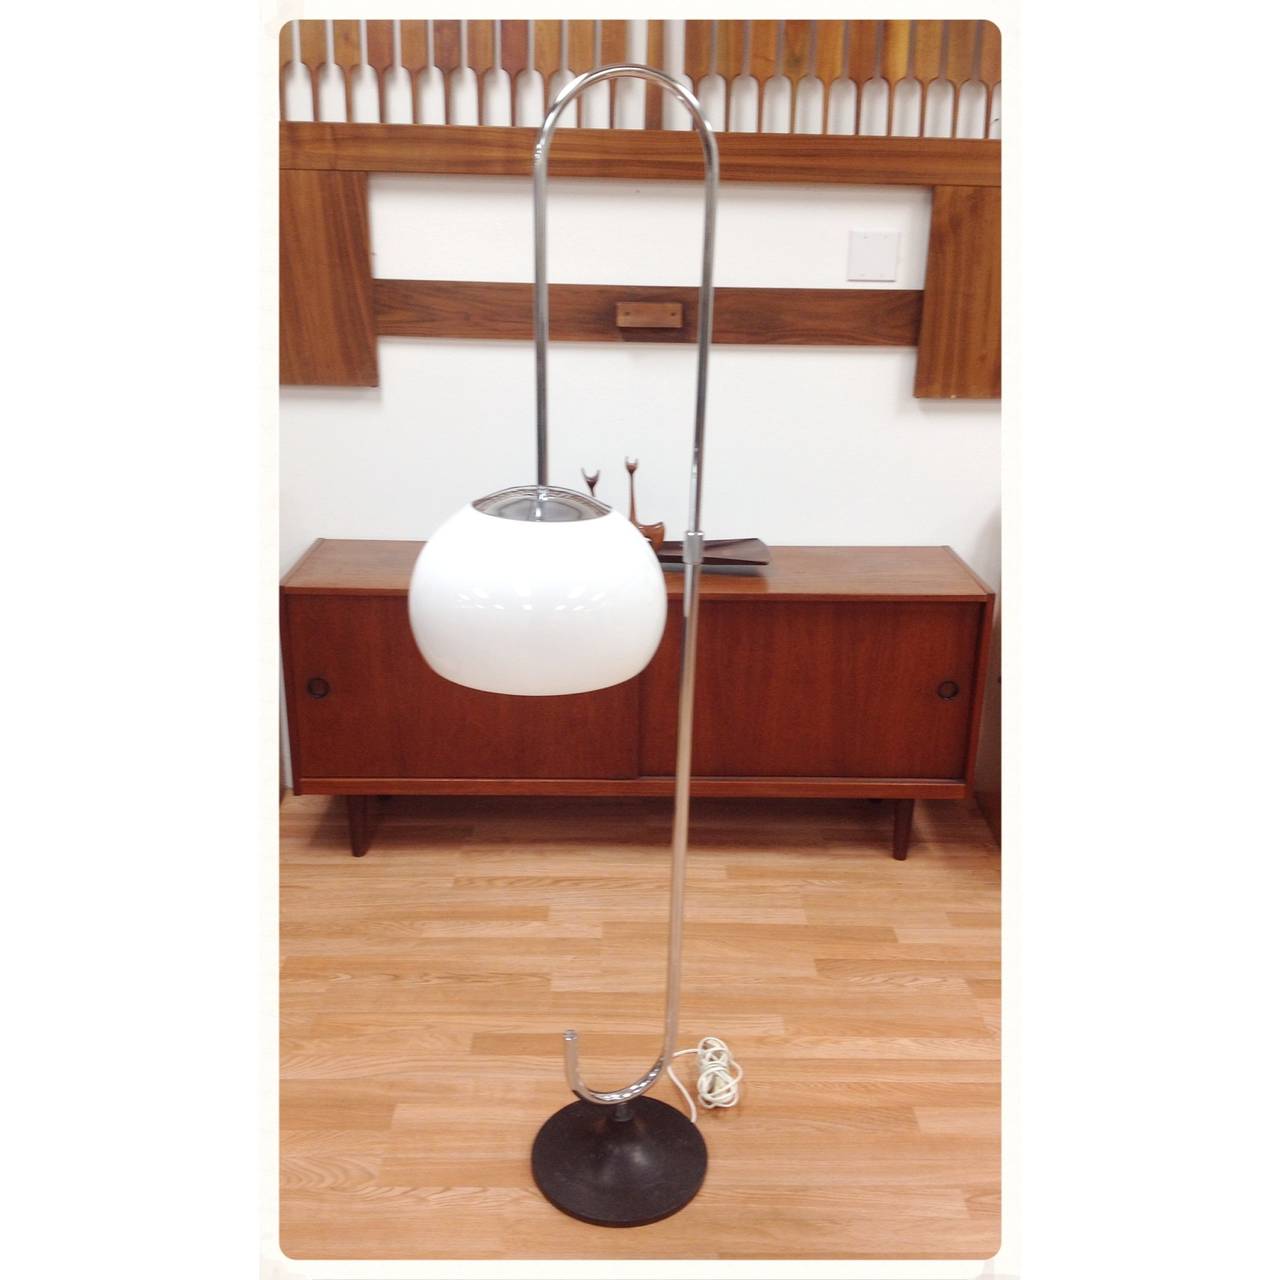 Adjustable chrome floor lamp by Reggiani. Lamp height and position are adjustable.